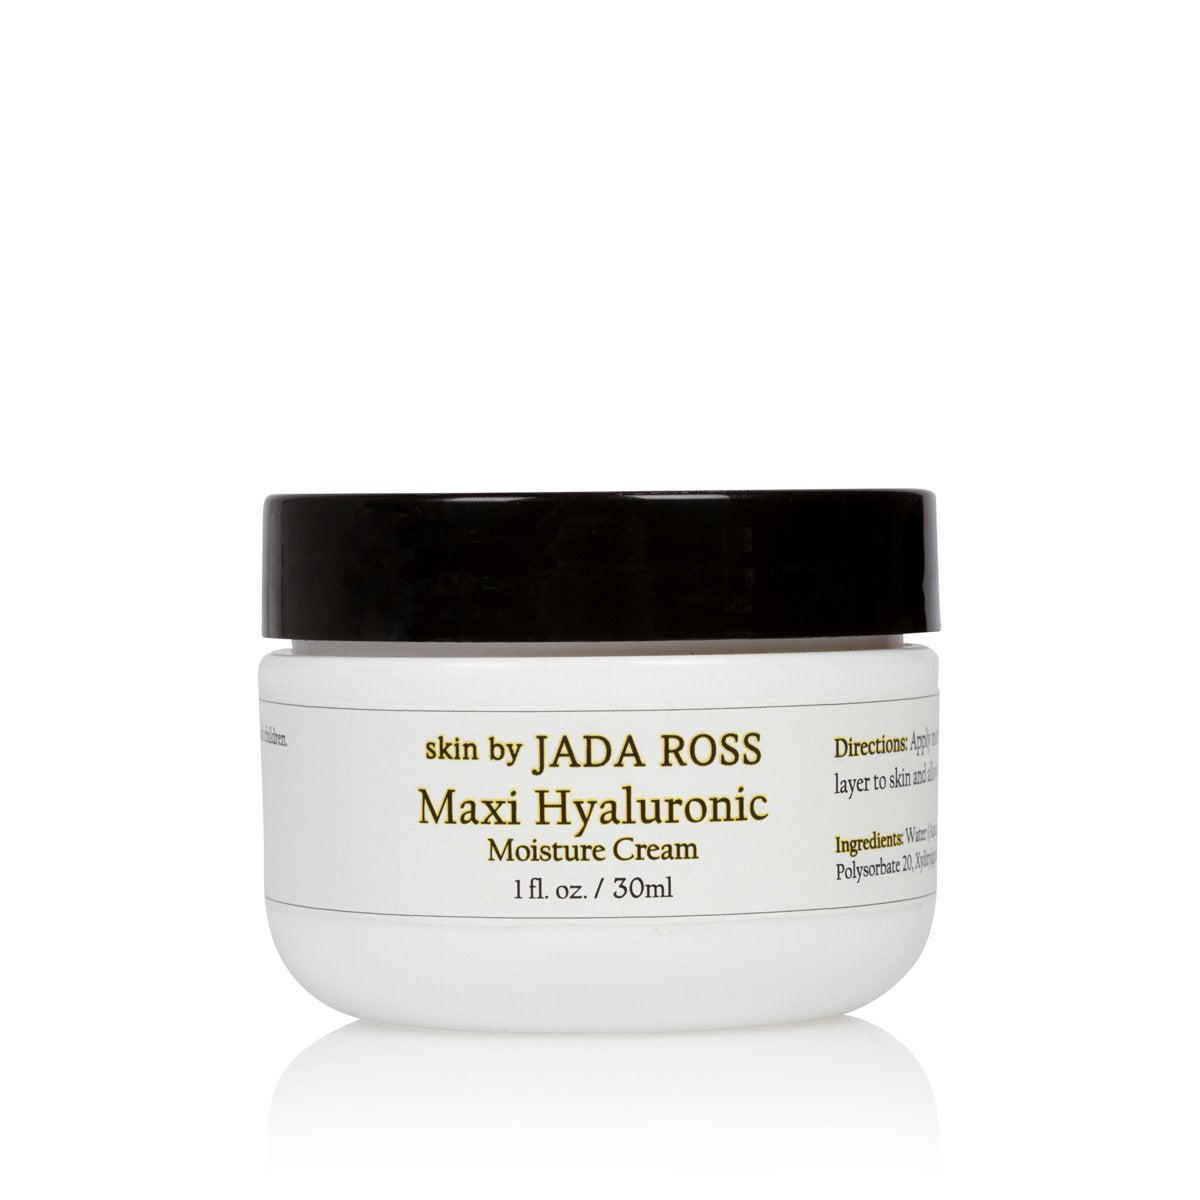 Maxi hyaluronic moisture cream to help you achieve a healthy rejuvenated glow. 